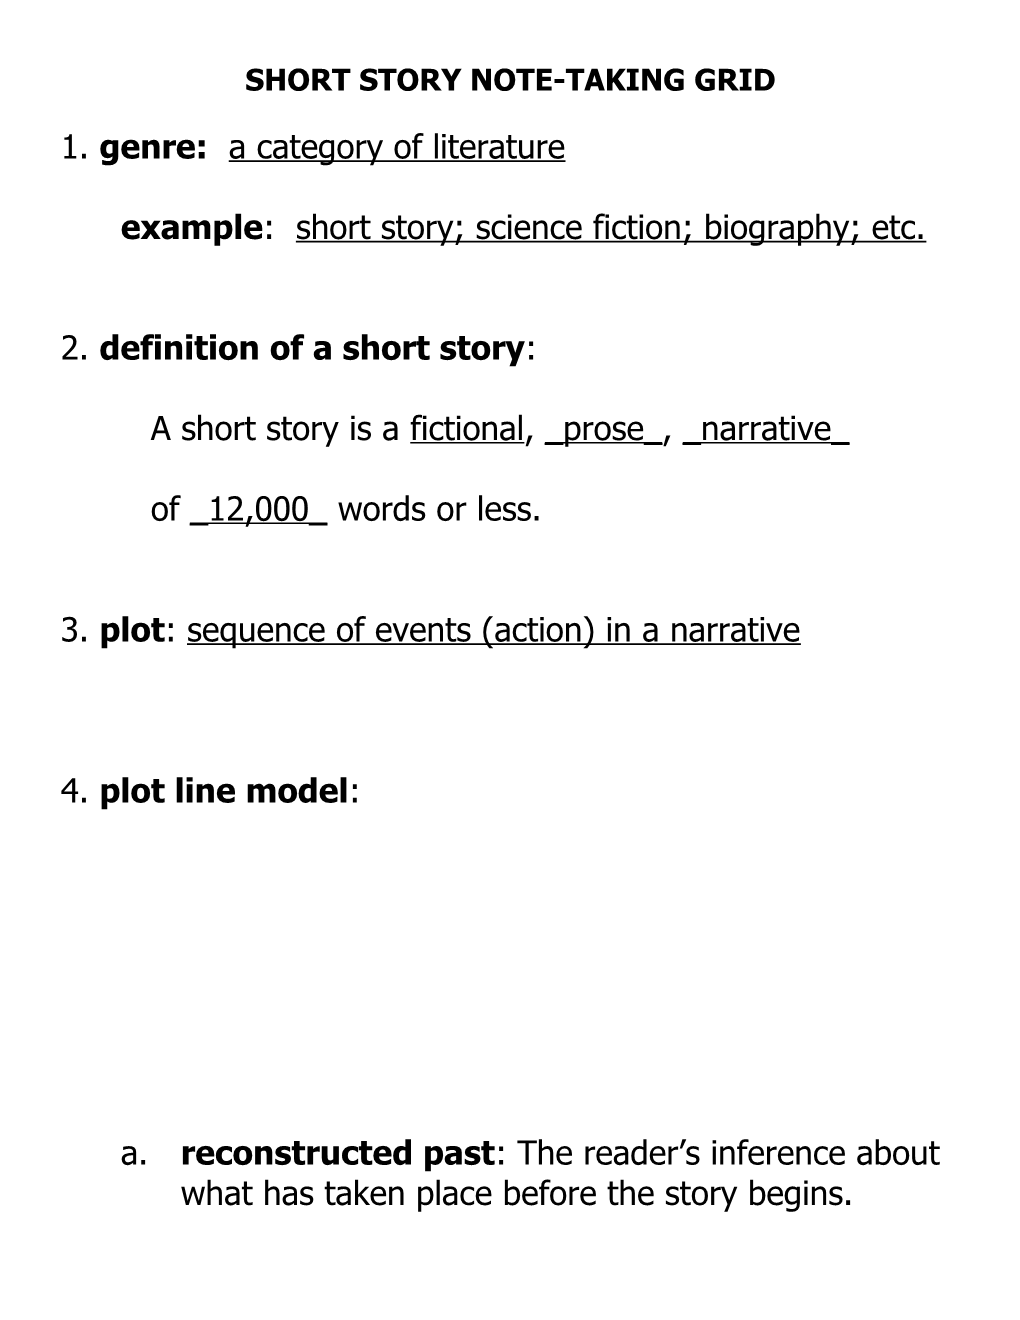 Short Story Note-Taking Grid